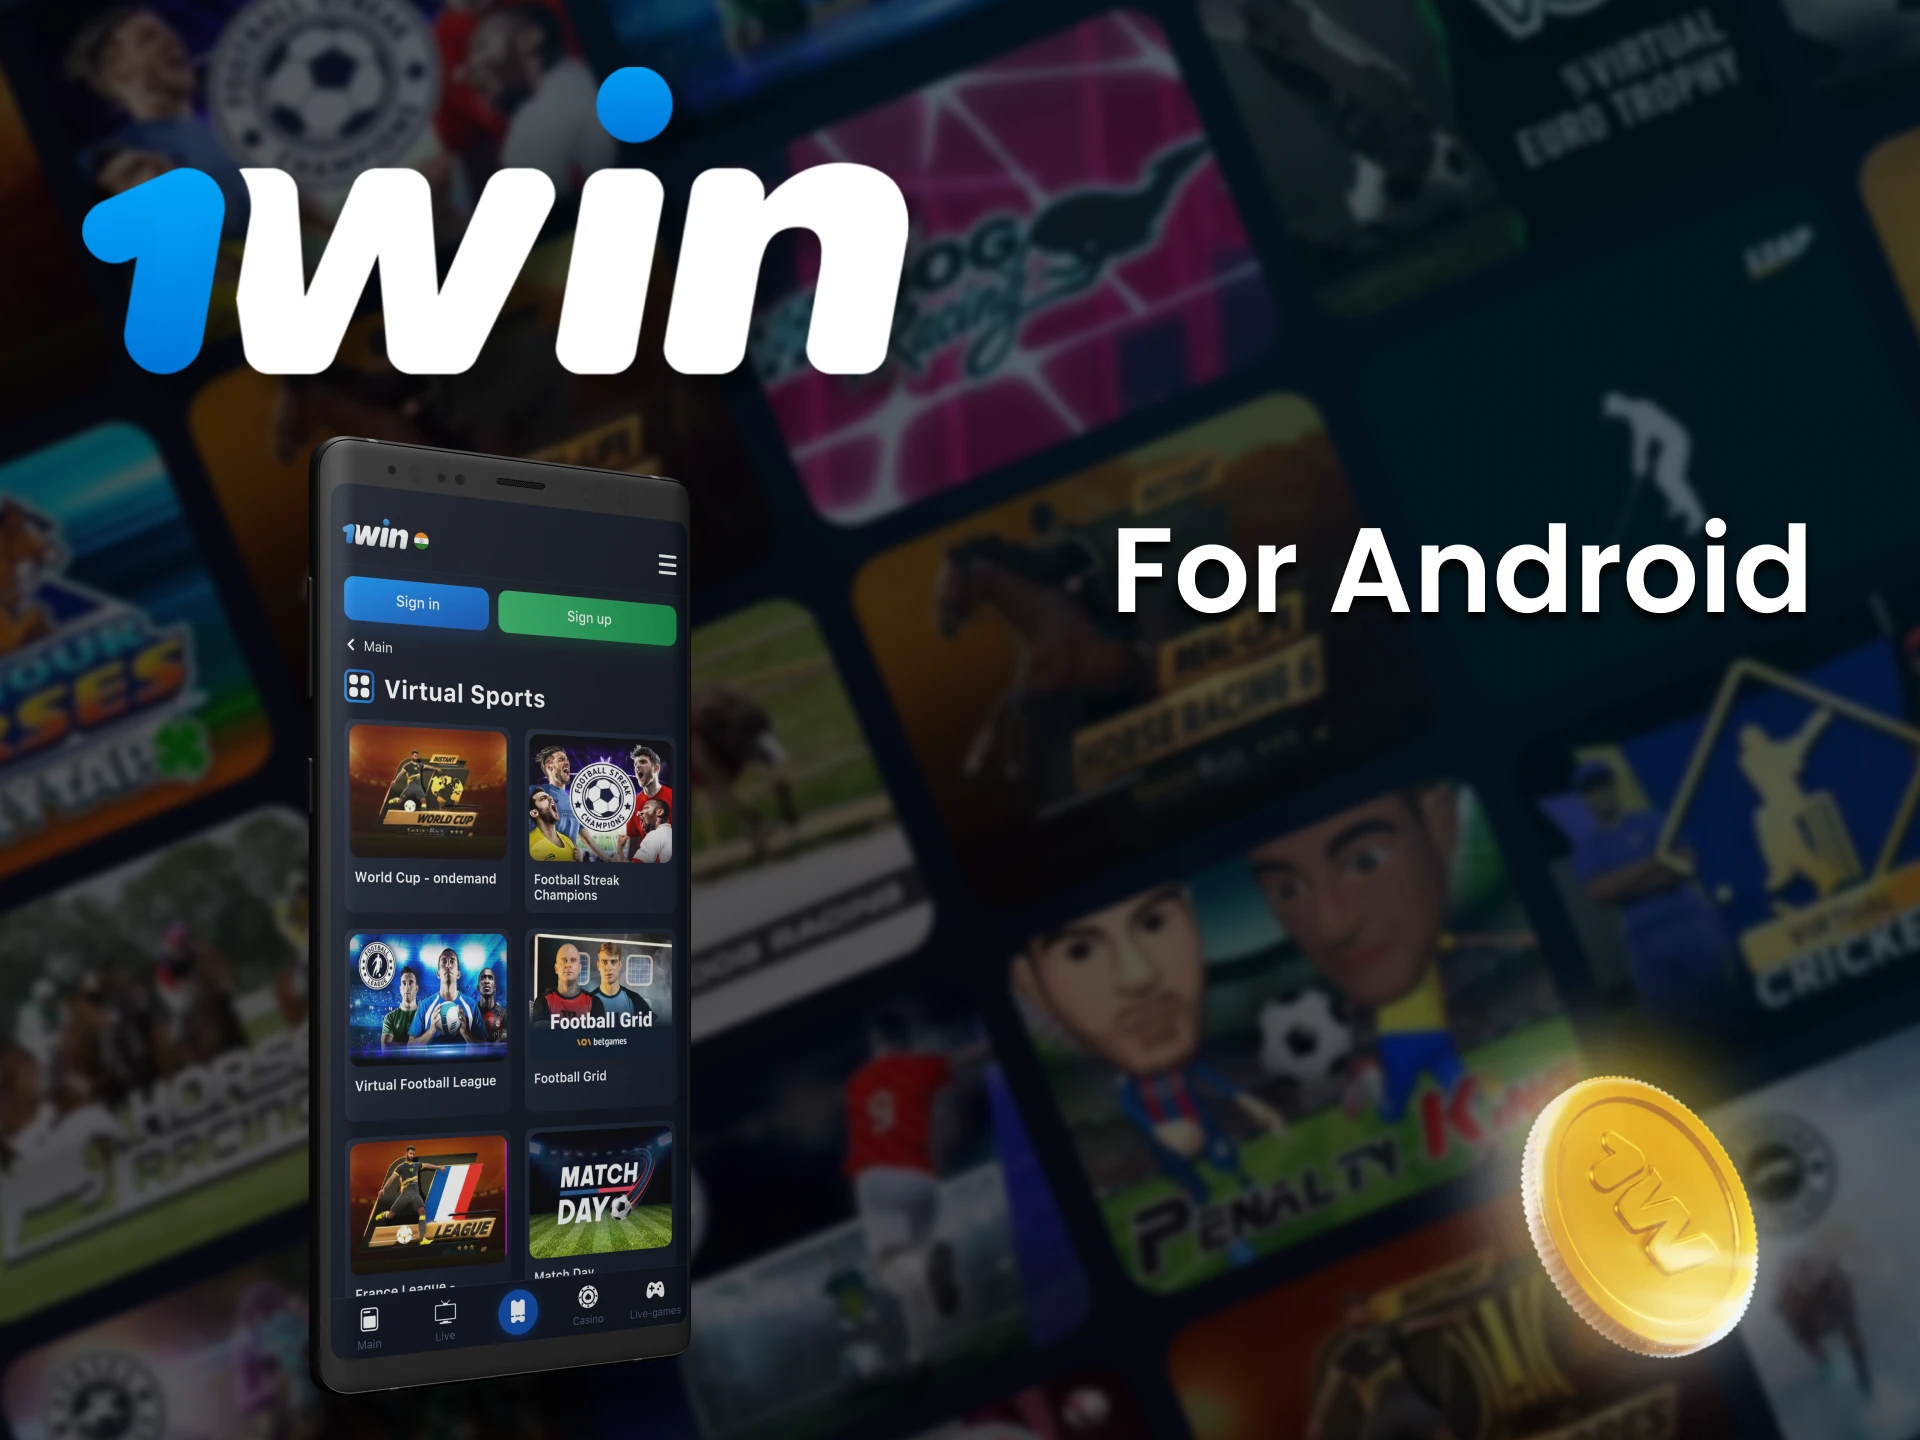 Download 1Win app for Android to place bets on Virtual Sports.